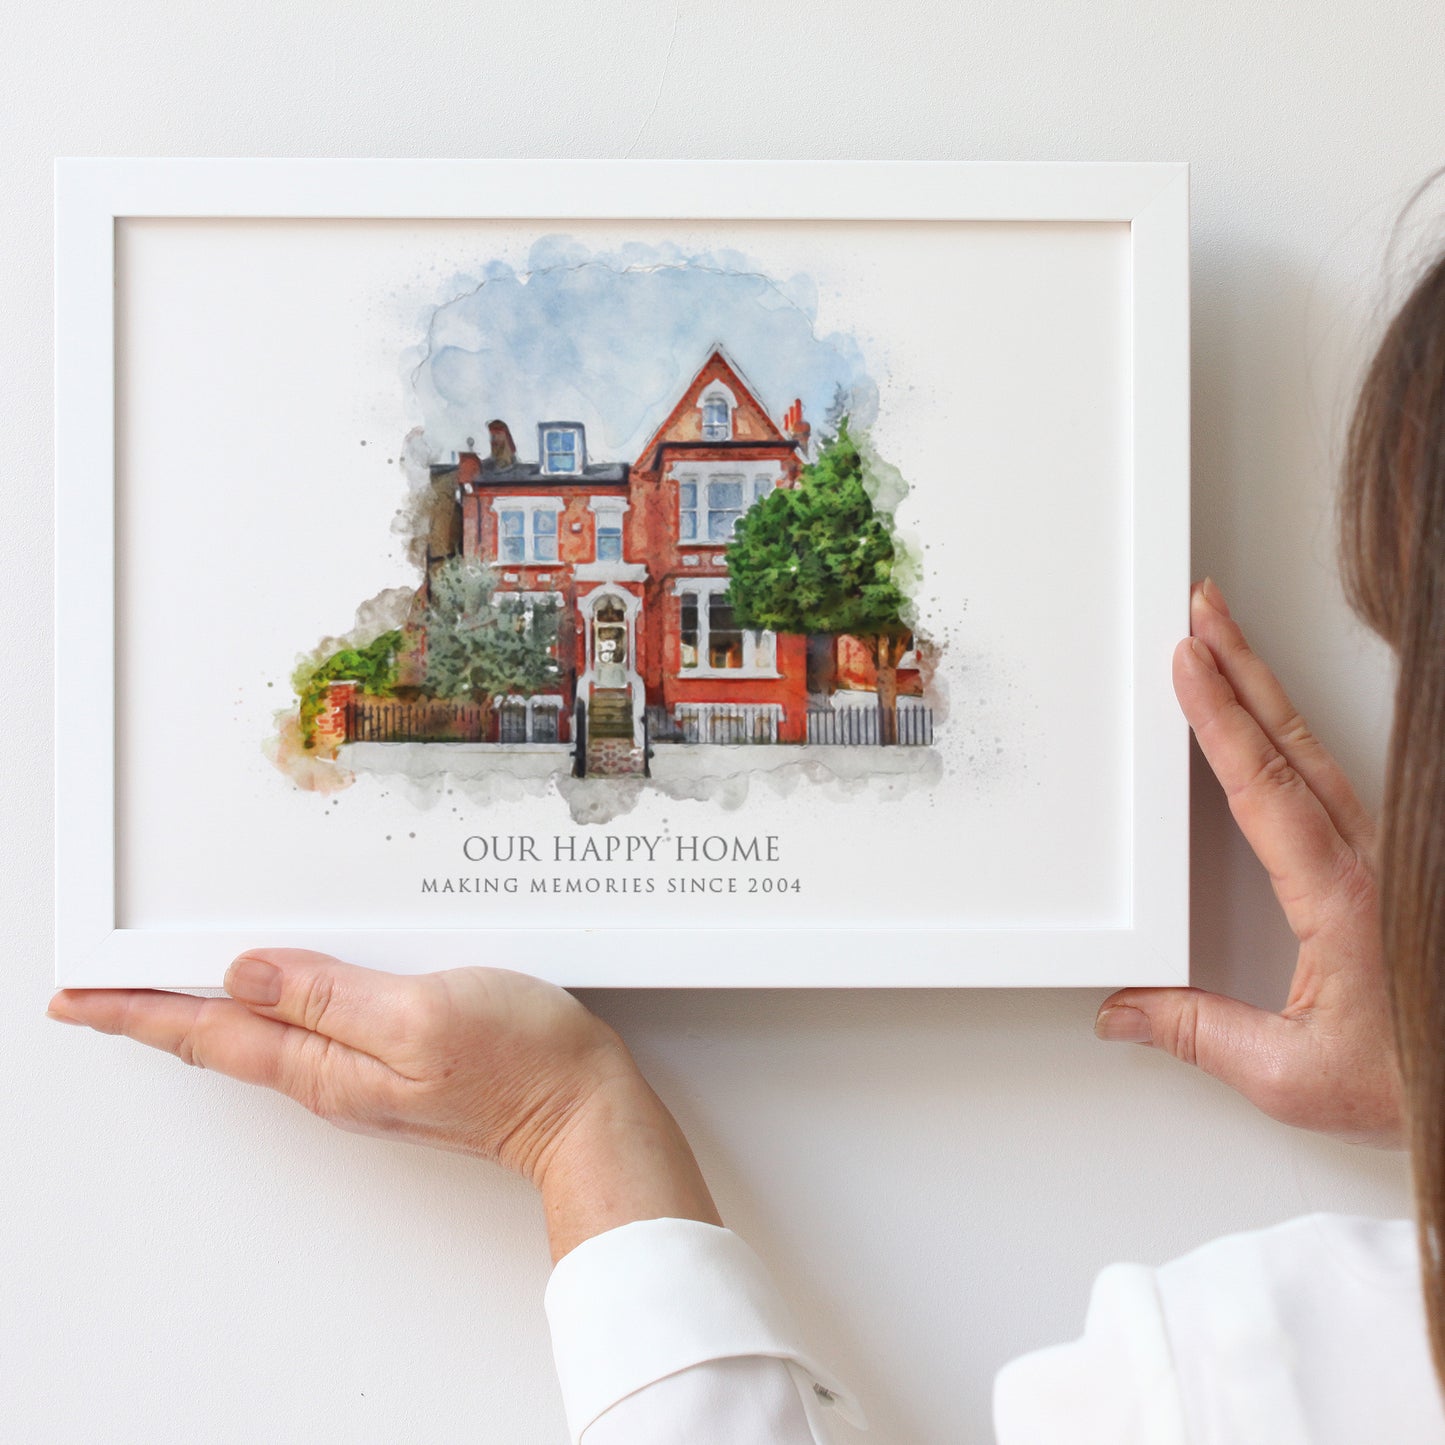 watercolour illustration of a detached London home in red brick in a landscape white A4 frame